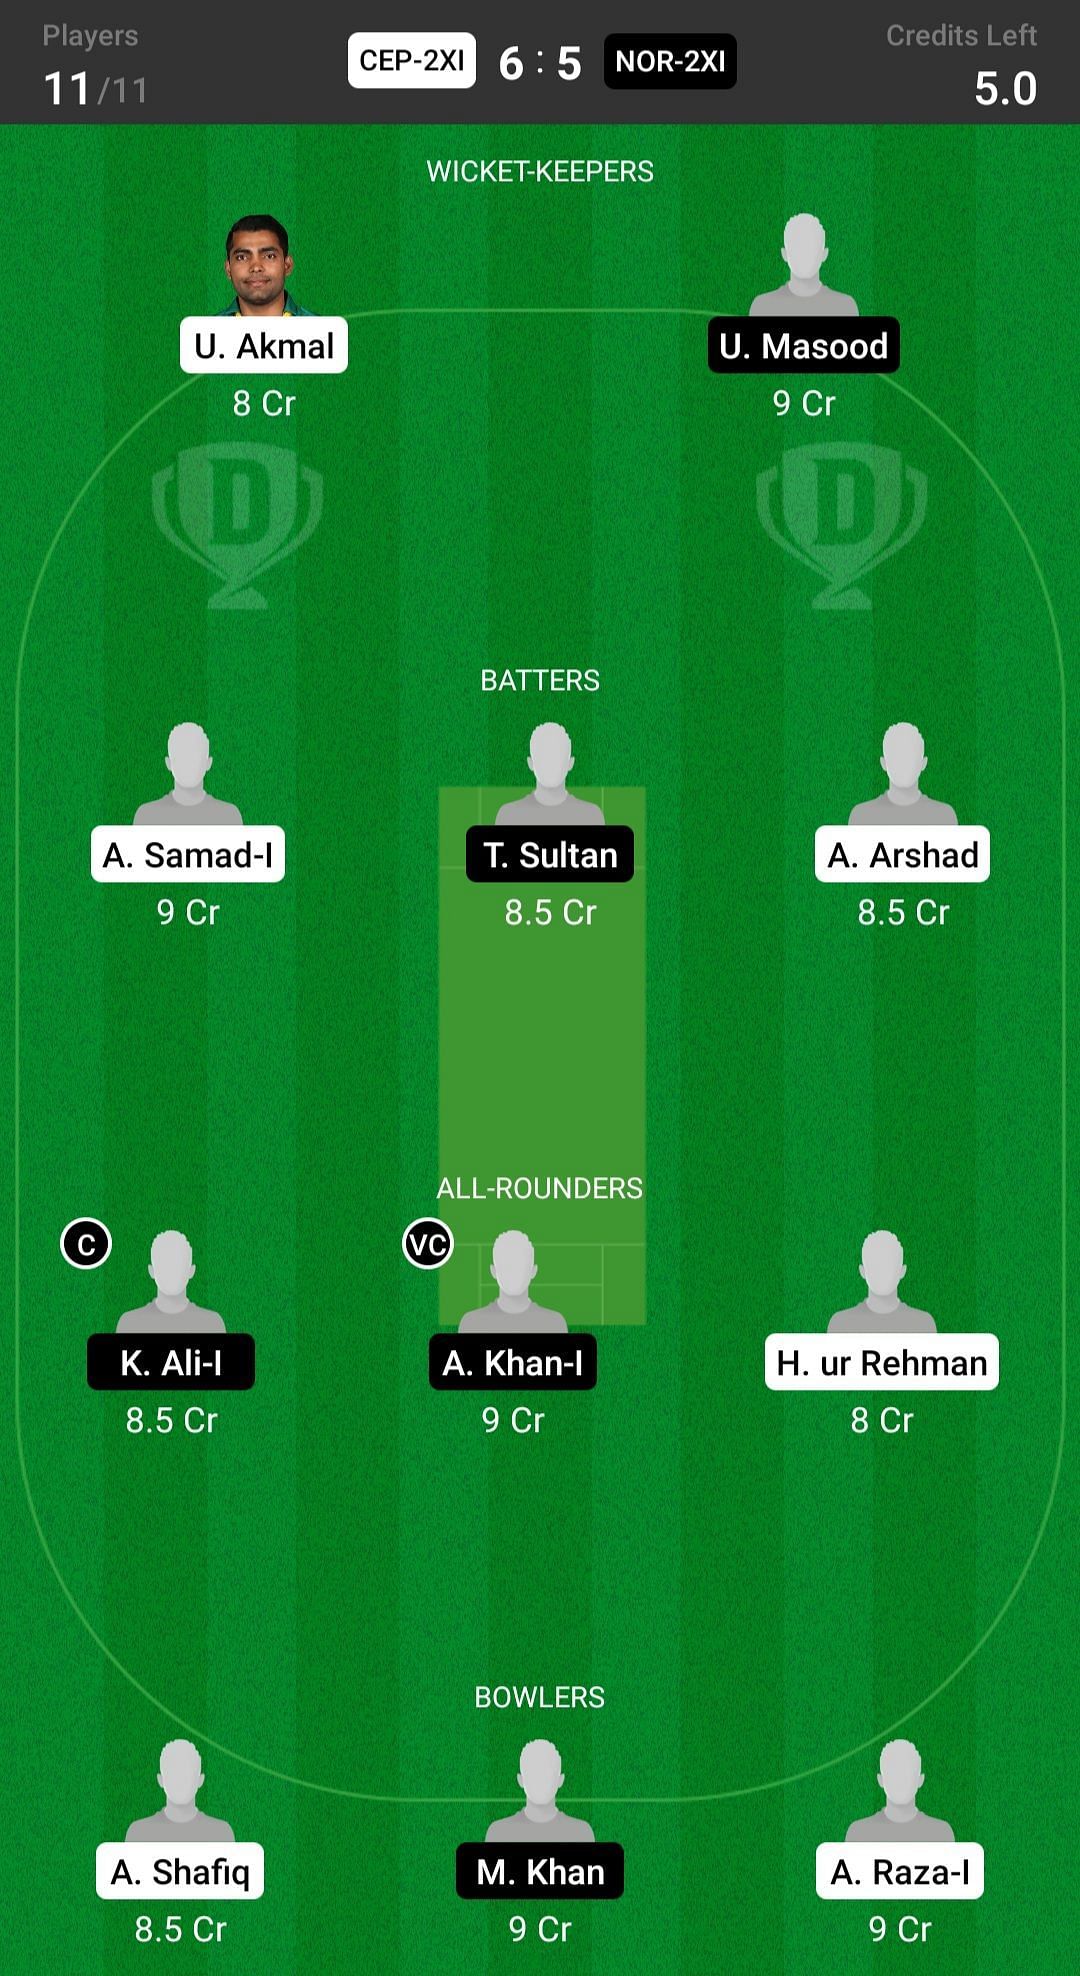 Central Punjab 2nd XI vs Northern 2nd XI Fantasy suggestion #1